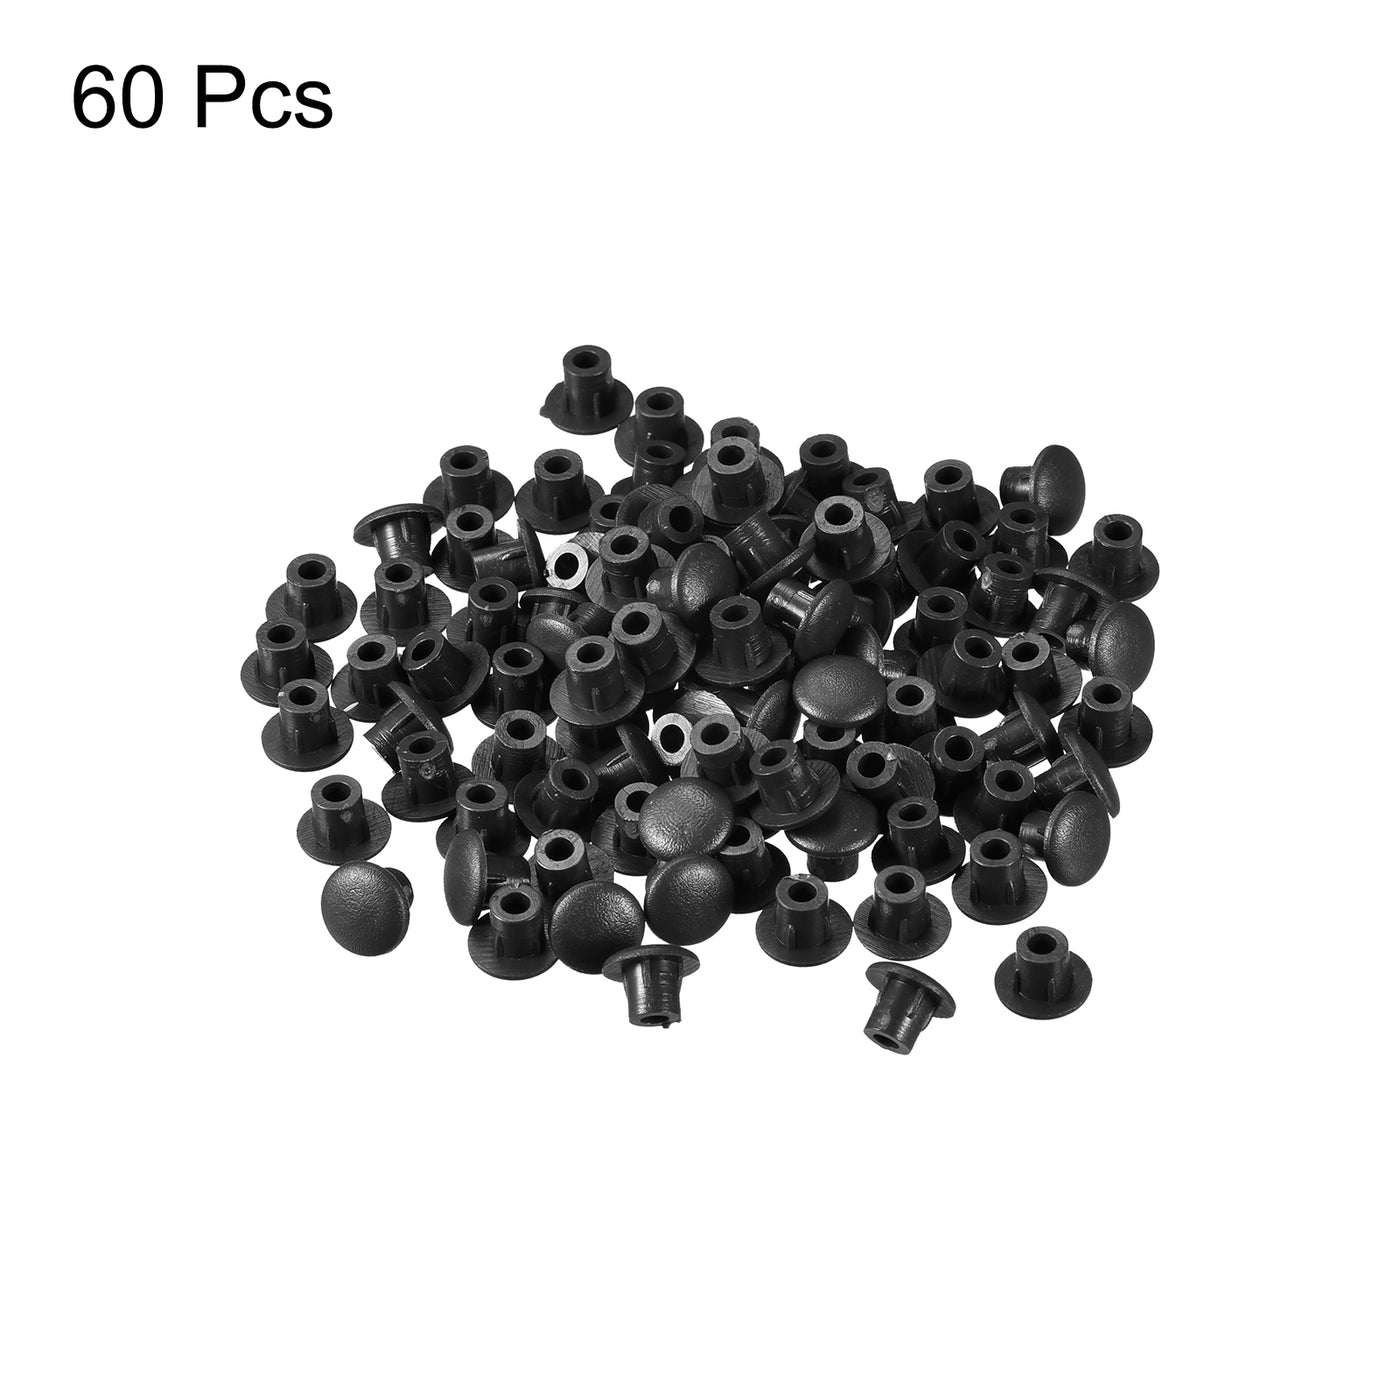 uxcell Uxcell Screw Hole Plugs, 10mm(25/64") Dia PP Snap in Shelf Button Flush Type Caps for Furniture Cabinet Cupboard, Black 60 Pcs